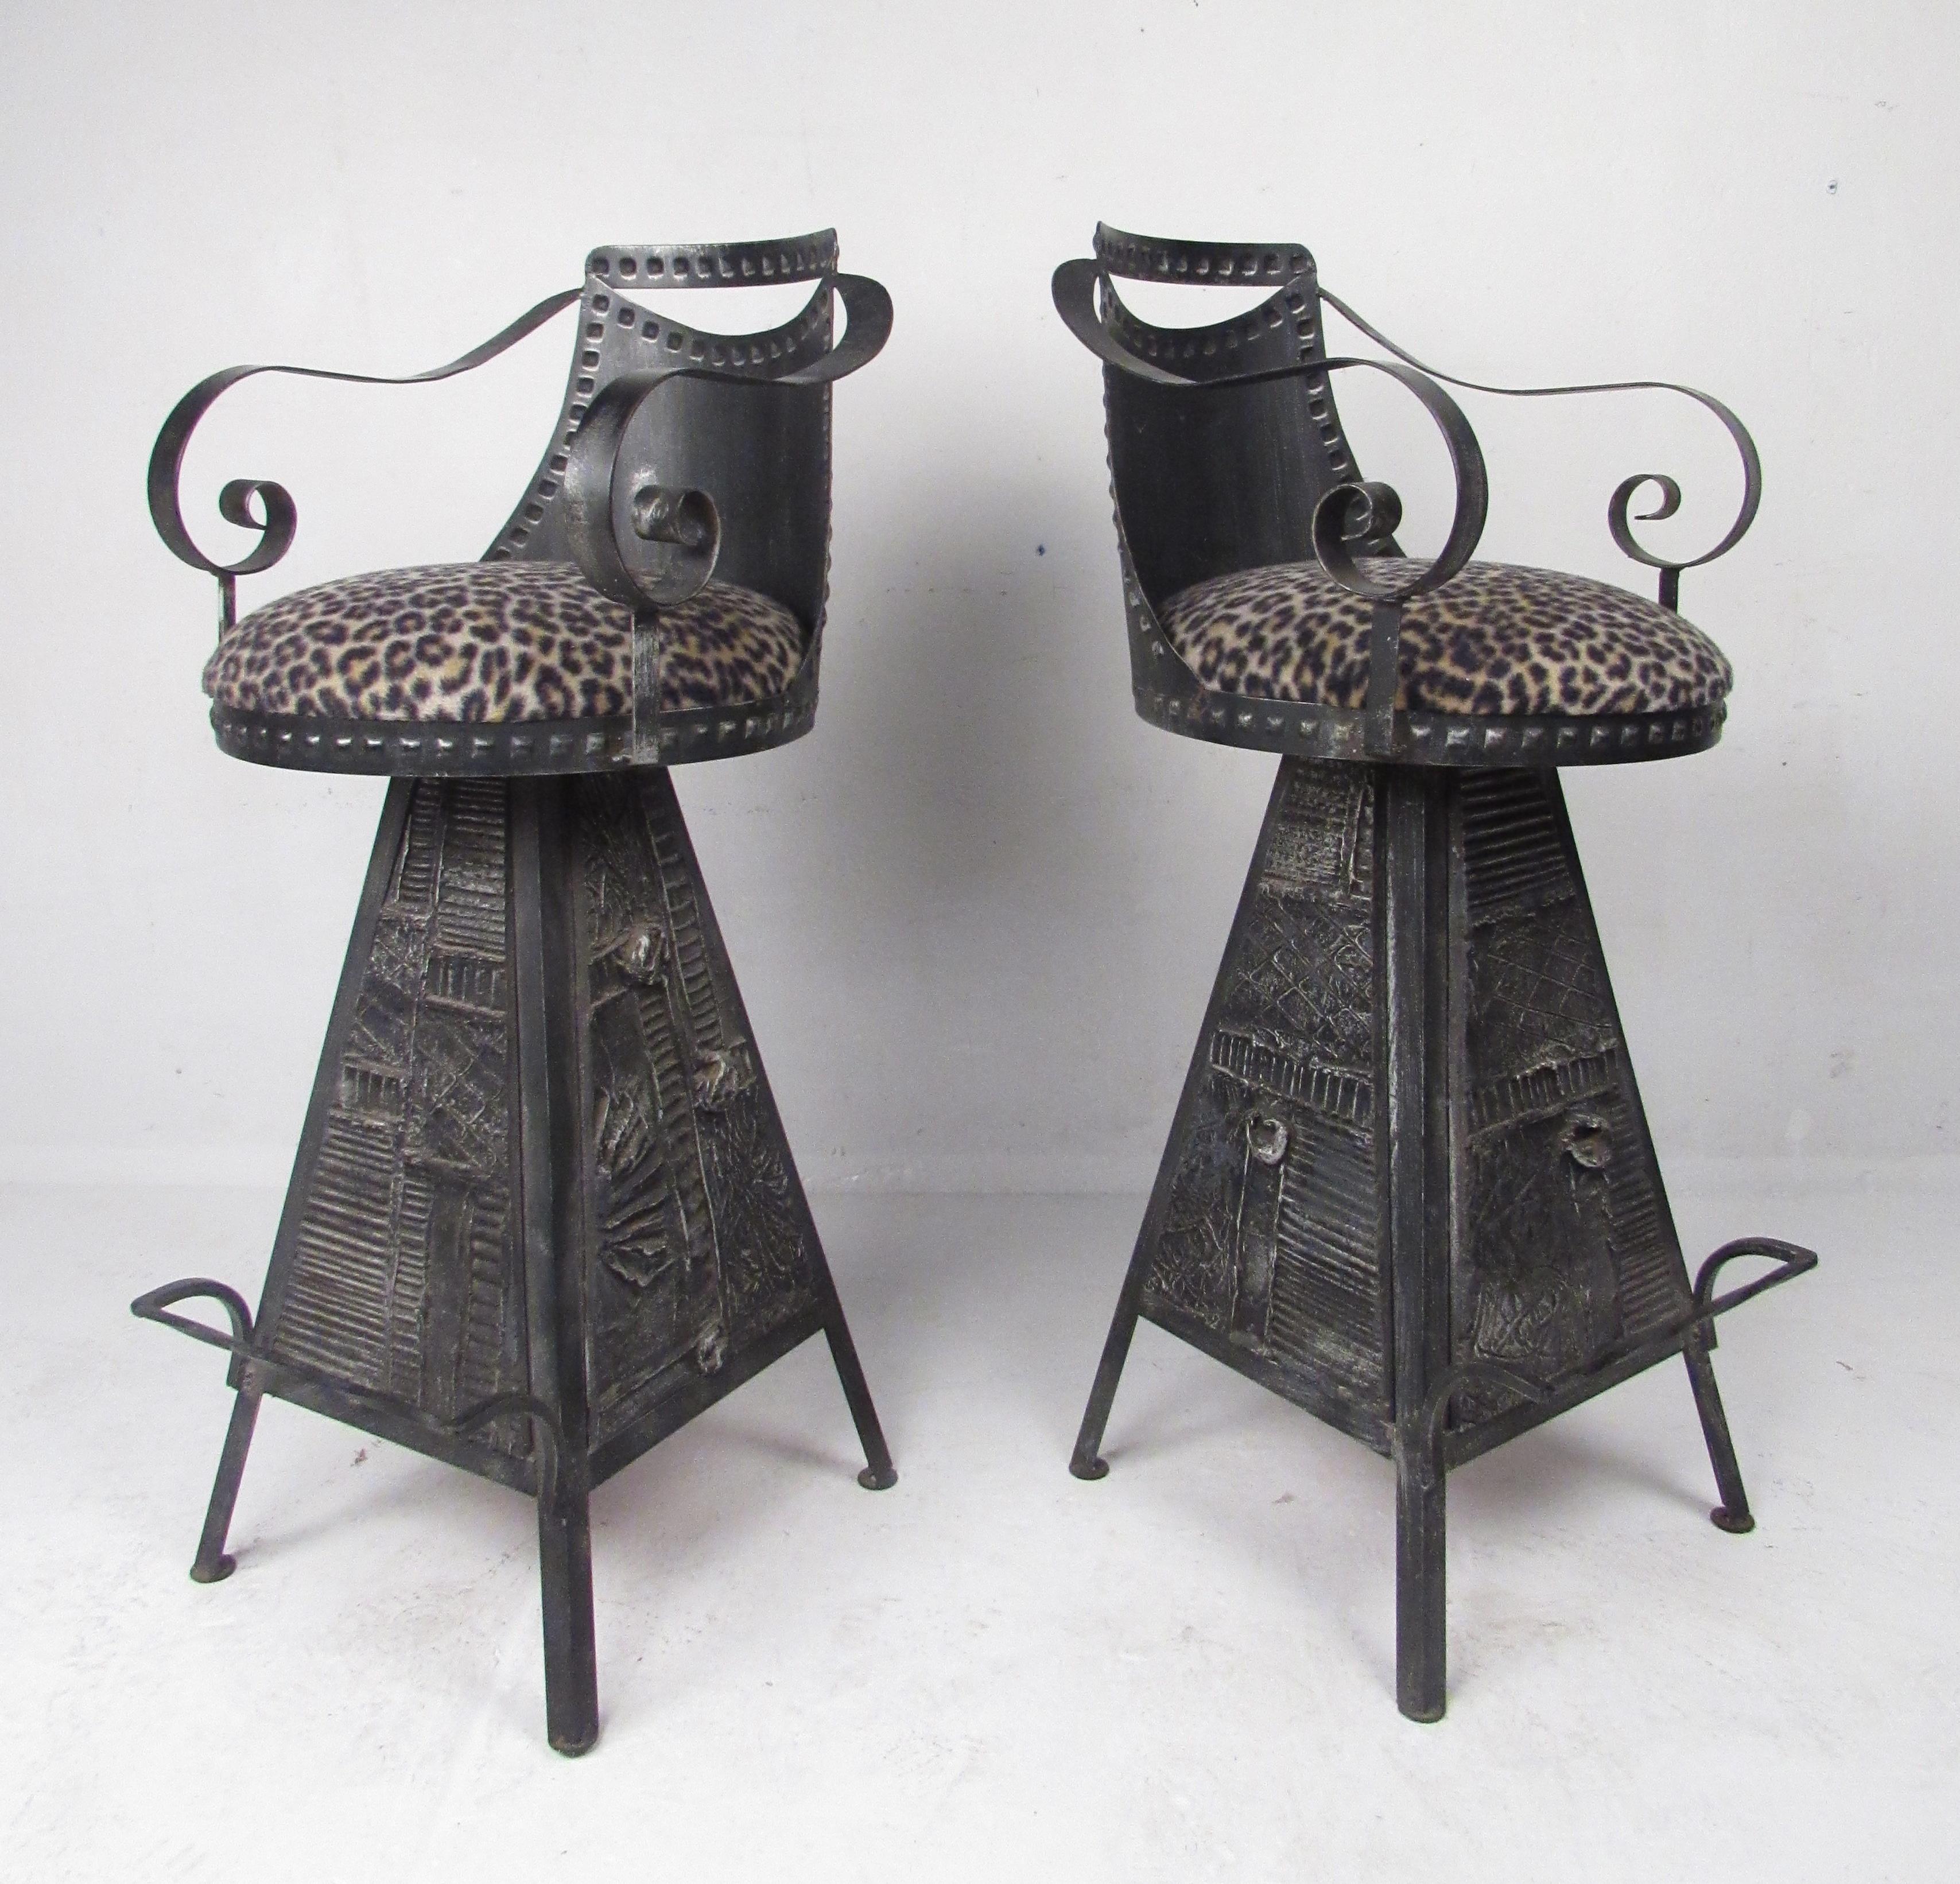 This stunning pair of vintage modern bar stools feature a textured bronze resin base with an iconic Brutalist design. The armrests boast wonderful scroll detail and the metal backrests contour perfectly ensuring optimal comfort. This rare and